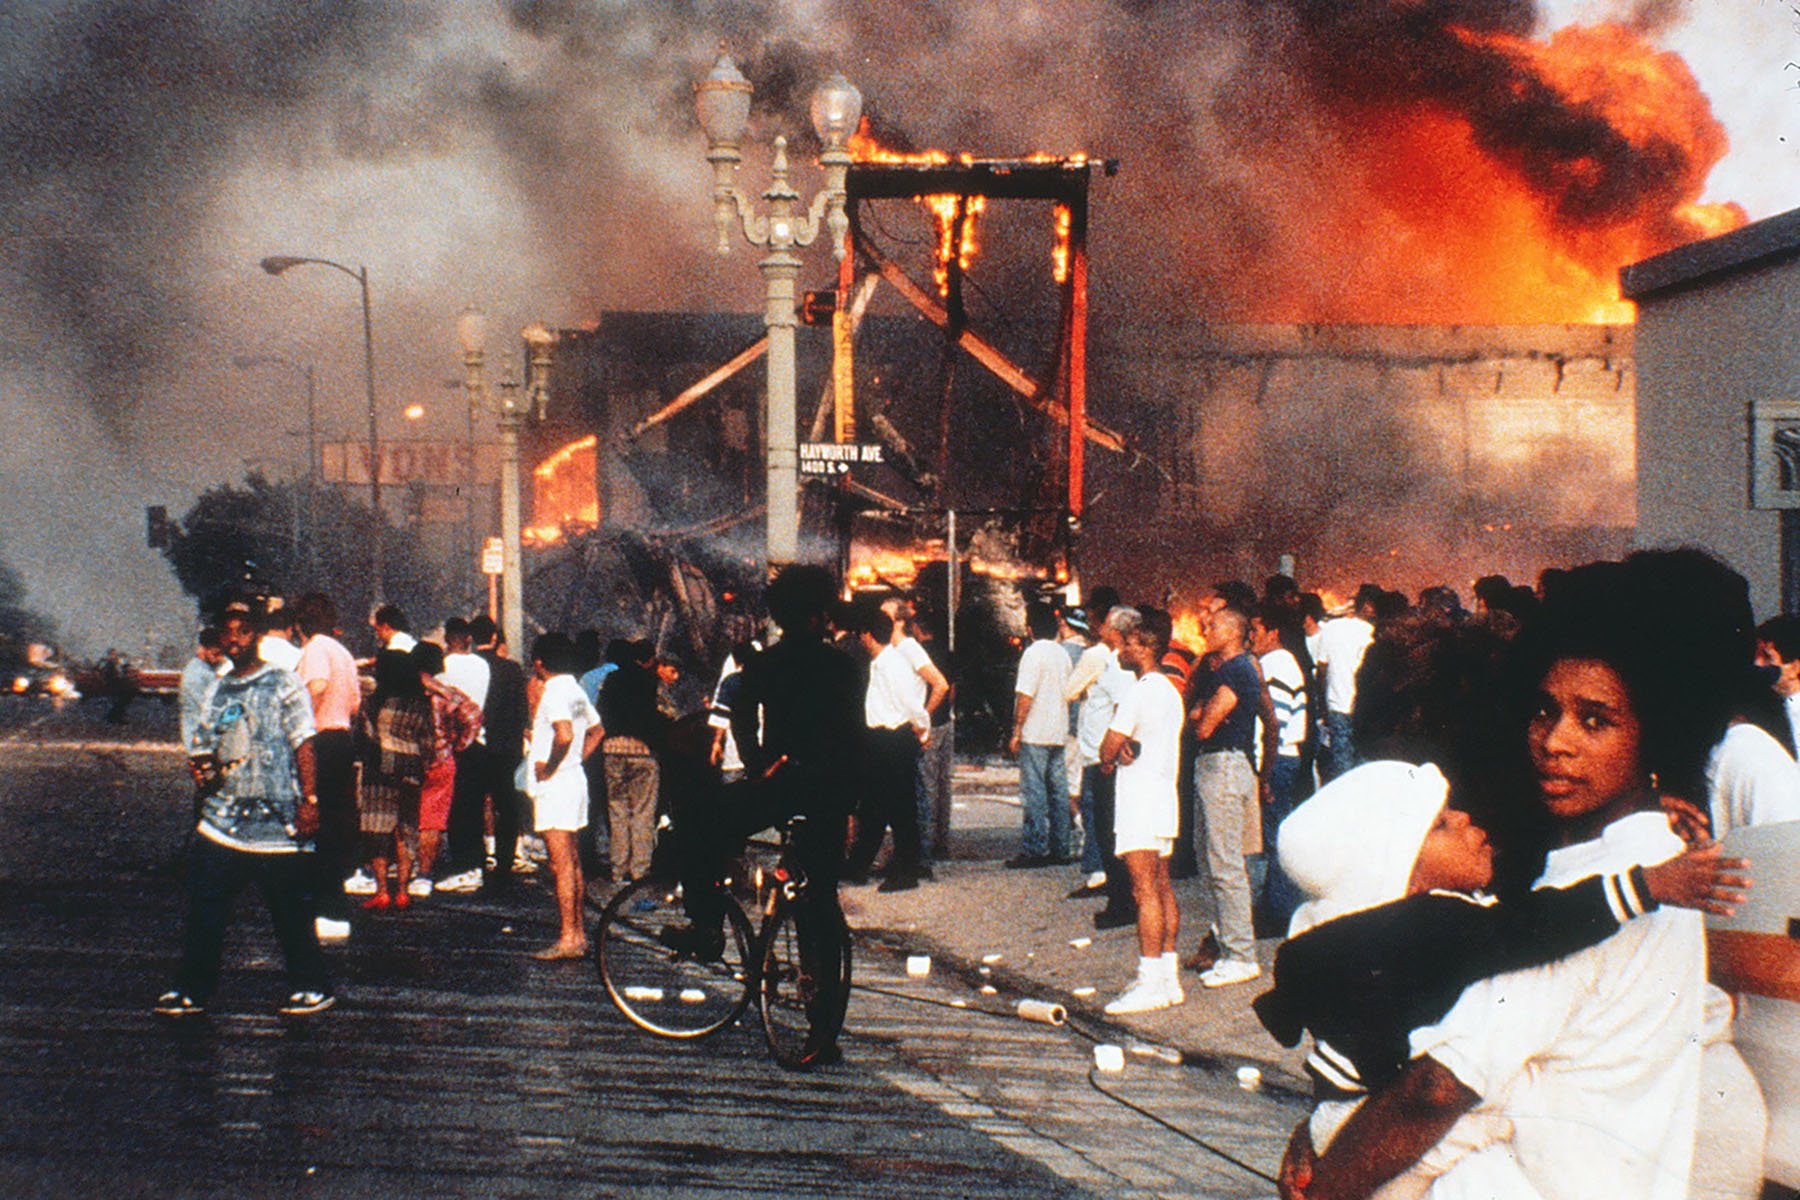 Bystanders watch as a fire rages at an intersection. In the forefront, a mother holds her baby.